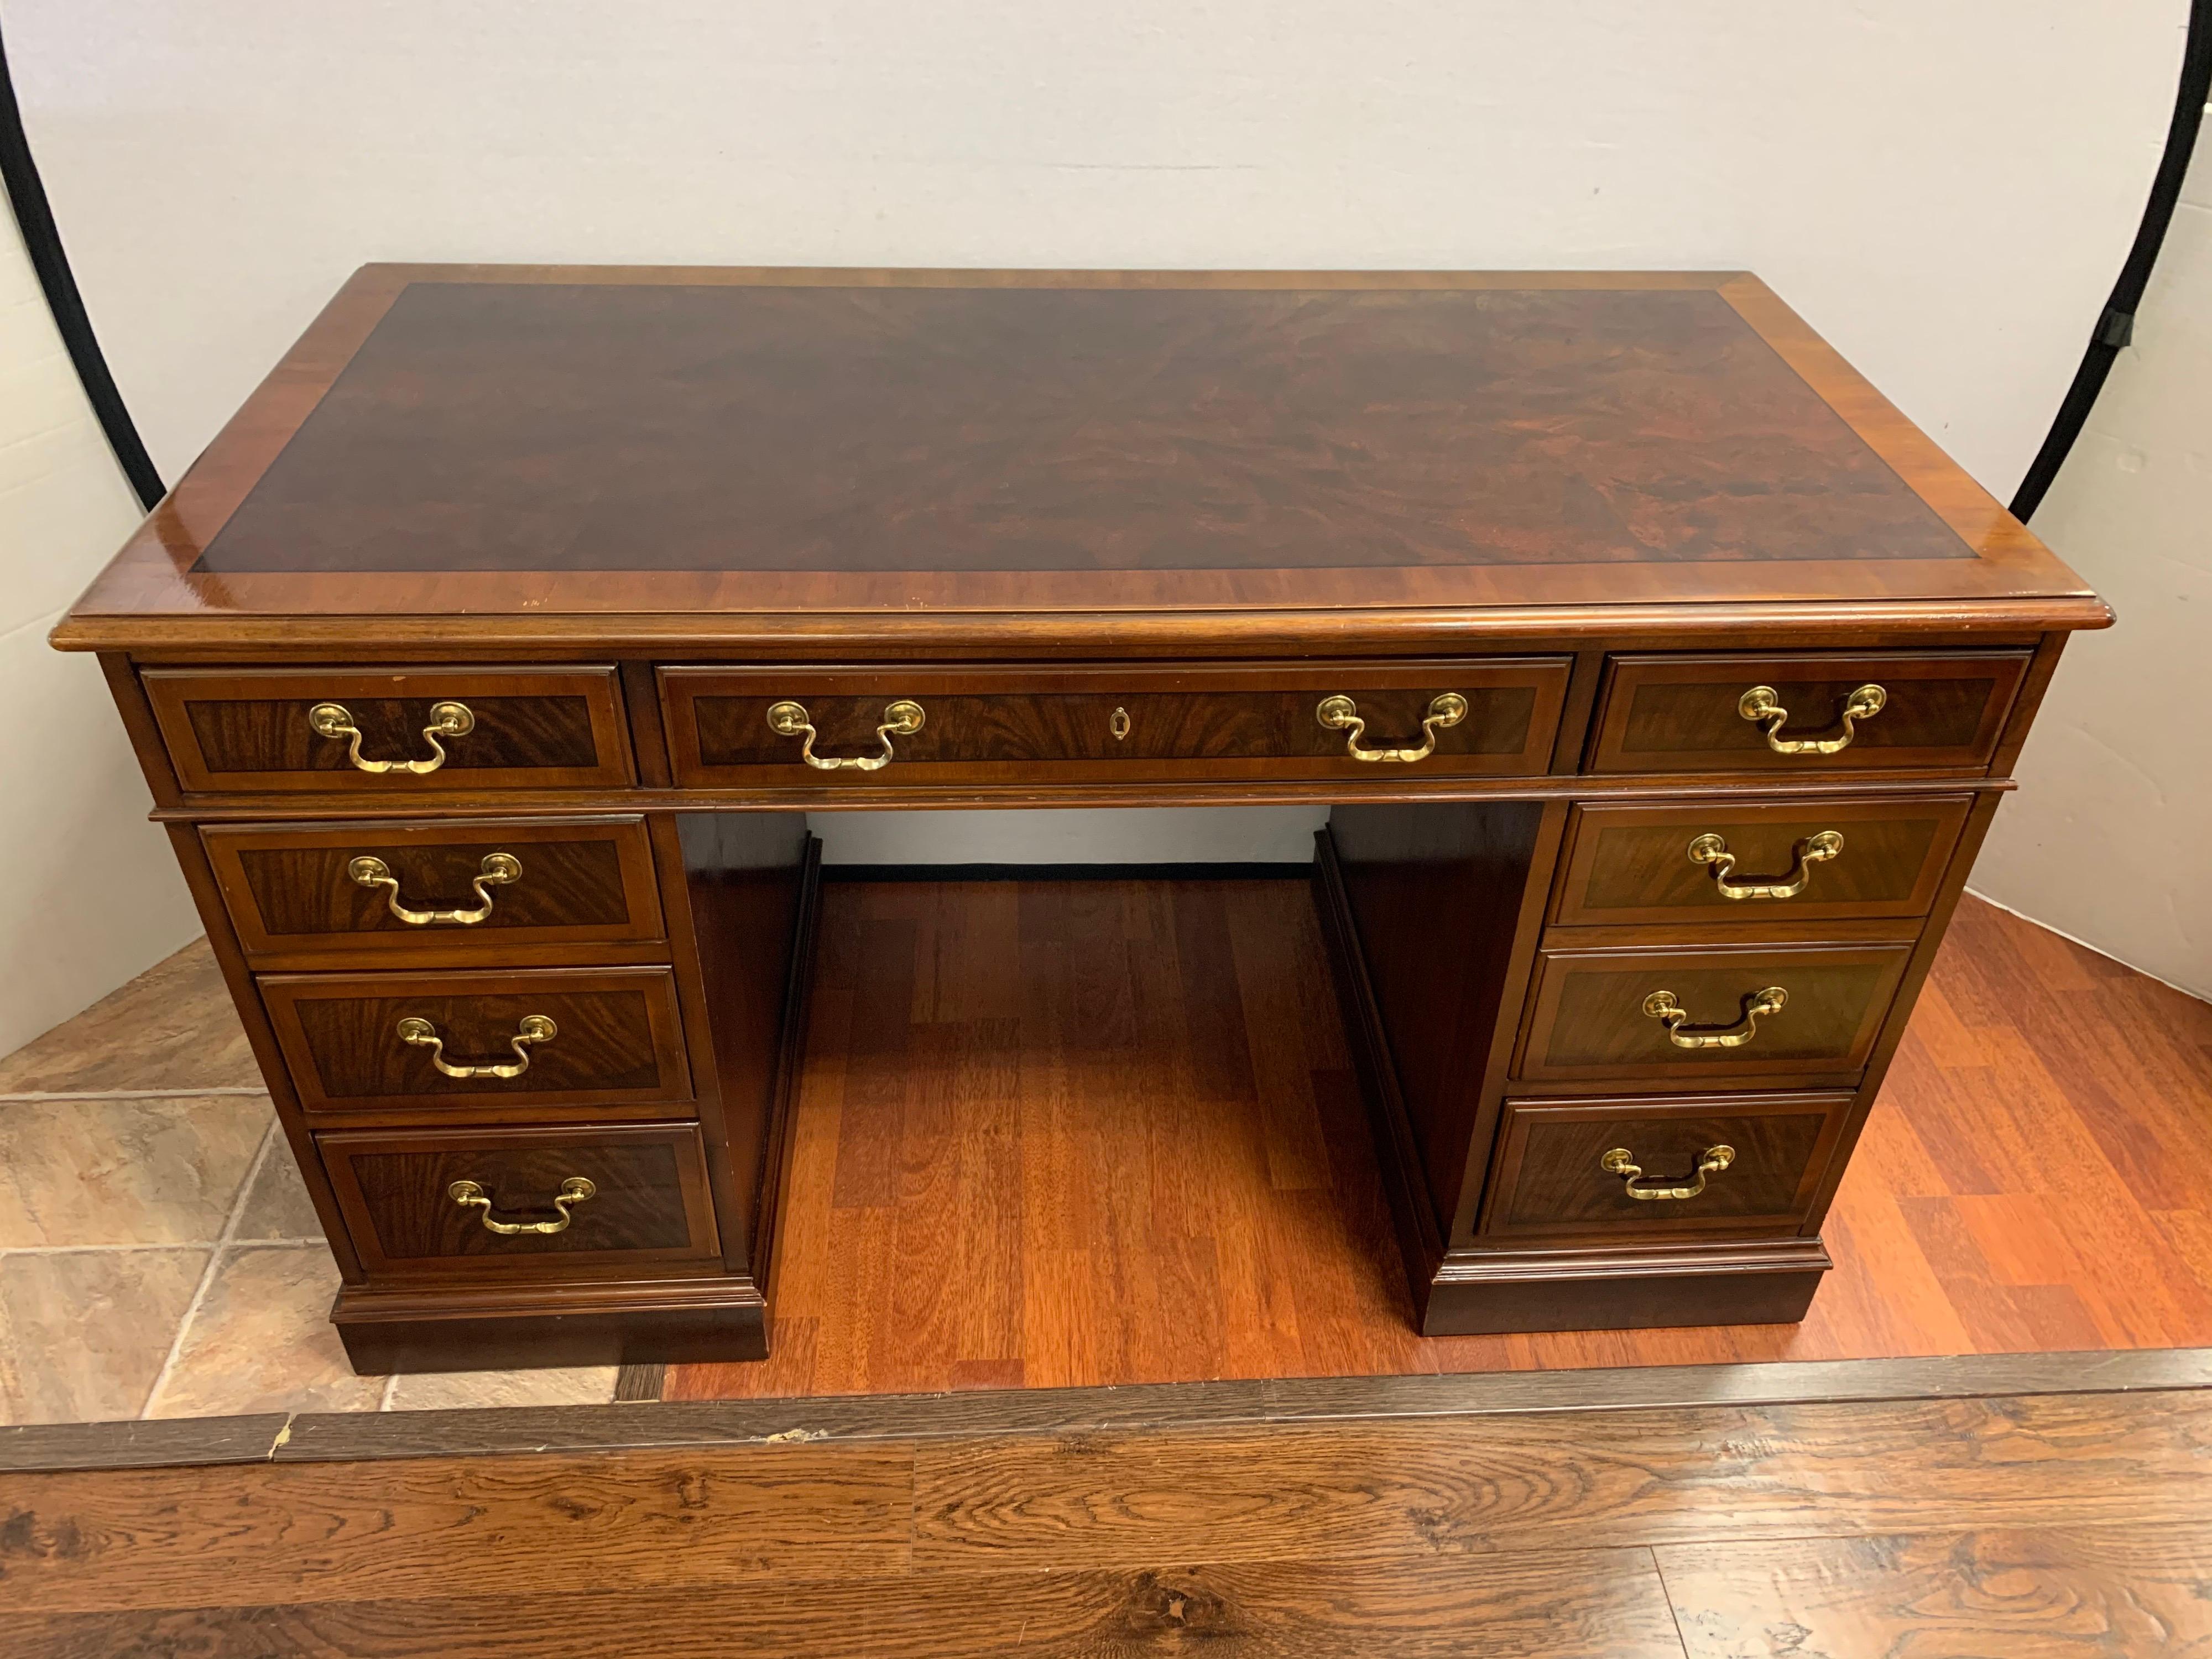 Elegant nine-drawer, signed Drexel mahogany and brass kneehole partners desk. Features a banded inlay on top and drawers.
Produced by one of the preeminent US furniture makers, Drexel. Dark mahogany finish is offset by real brass hardware